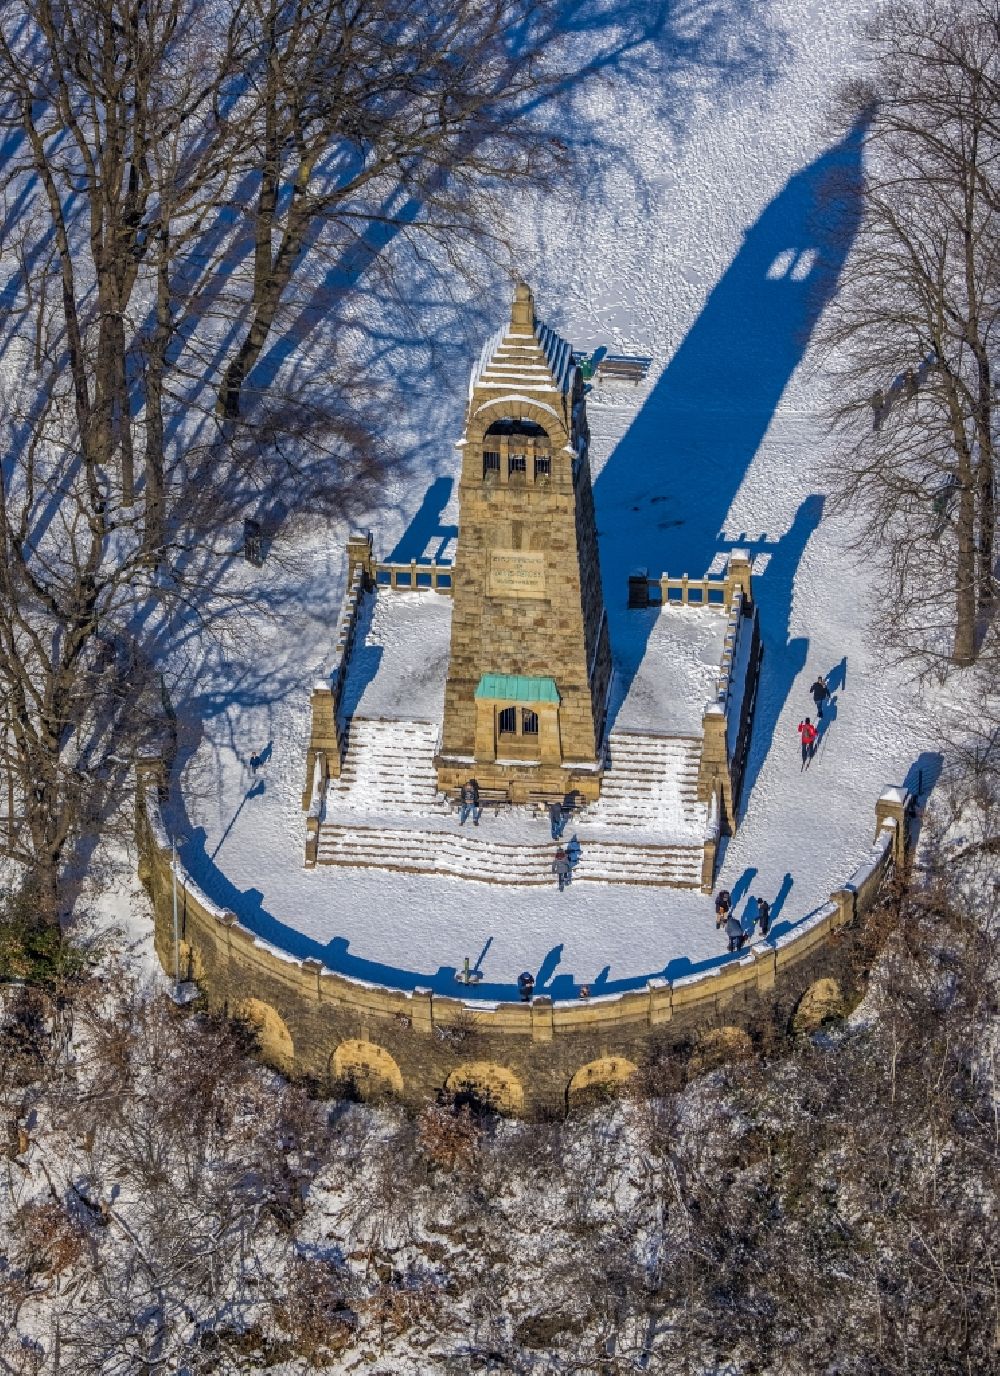 Witten from above - Wintry snowy structure of the observation tower Berger - Denkmal in Witten in the state North Rhine-Westphalia, Germany